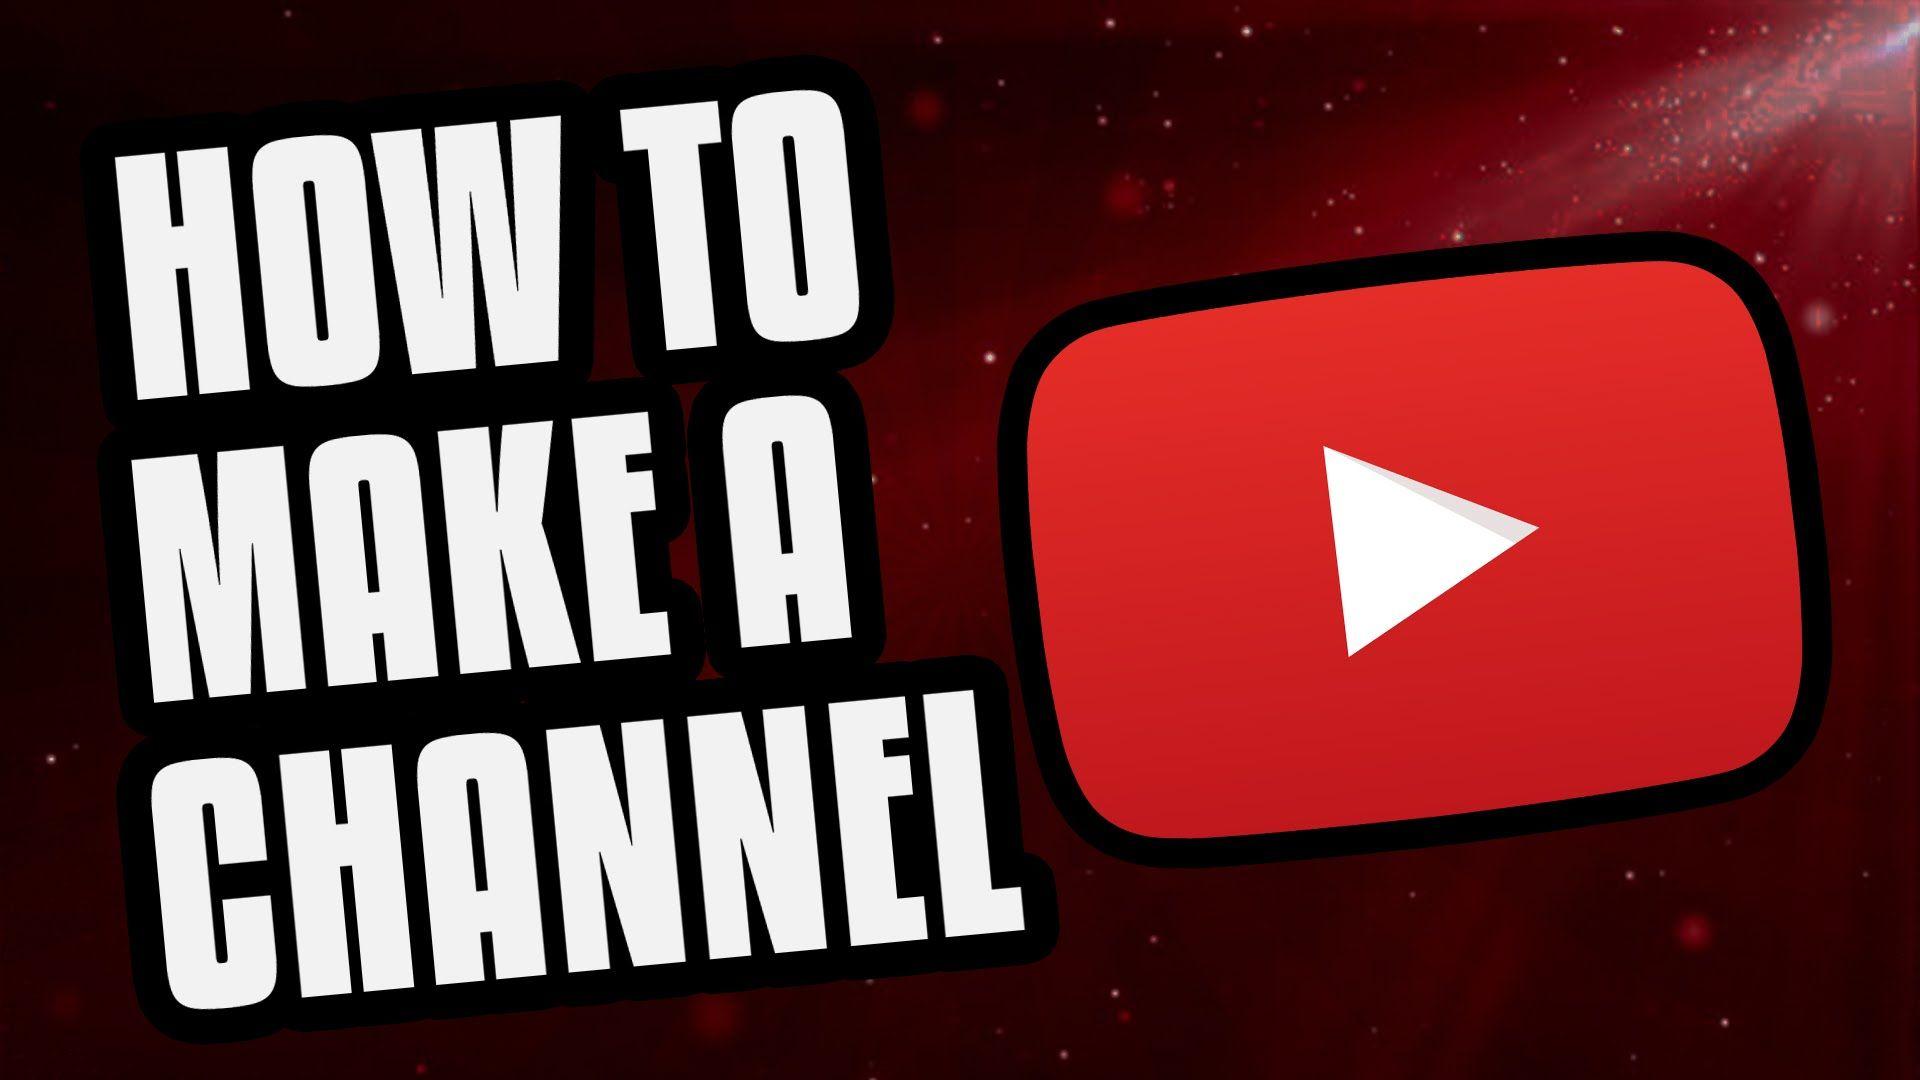 2016 New YouTube Logo - How To Make A YouTube Channel! (2019 Beginners Guide) - YouTube